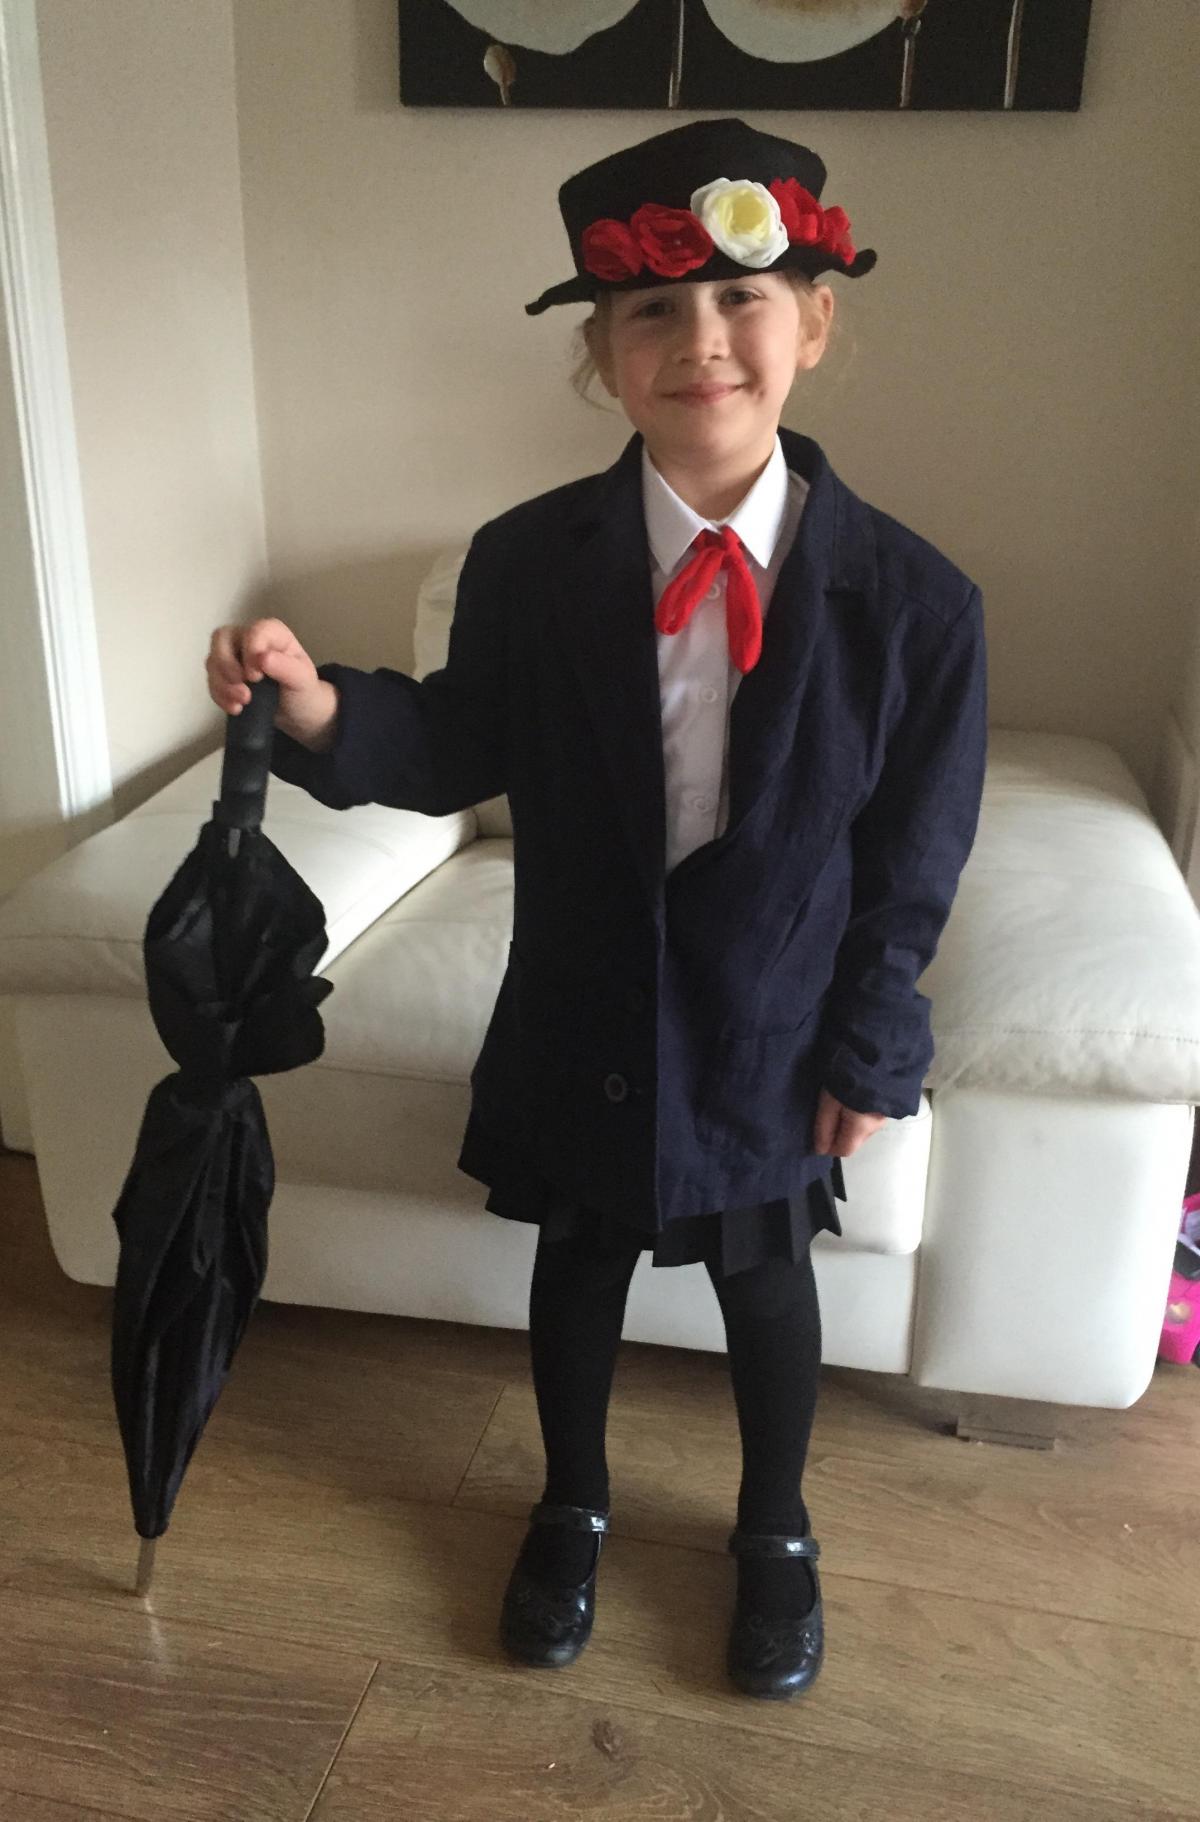 Lilly Oakey aged 5 from St Catherine's School